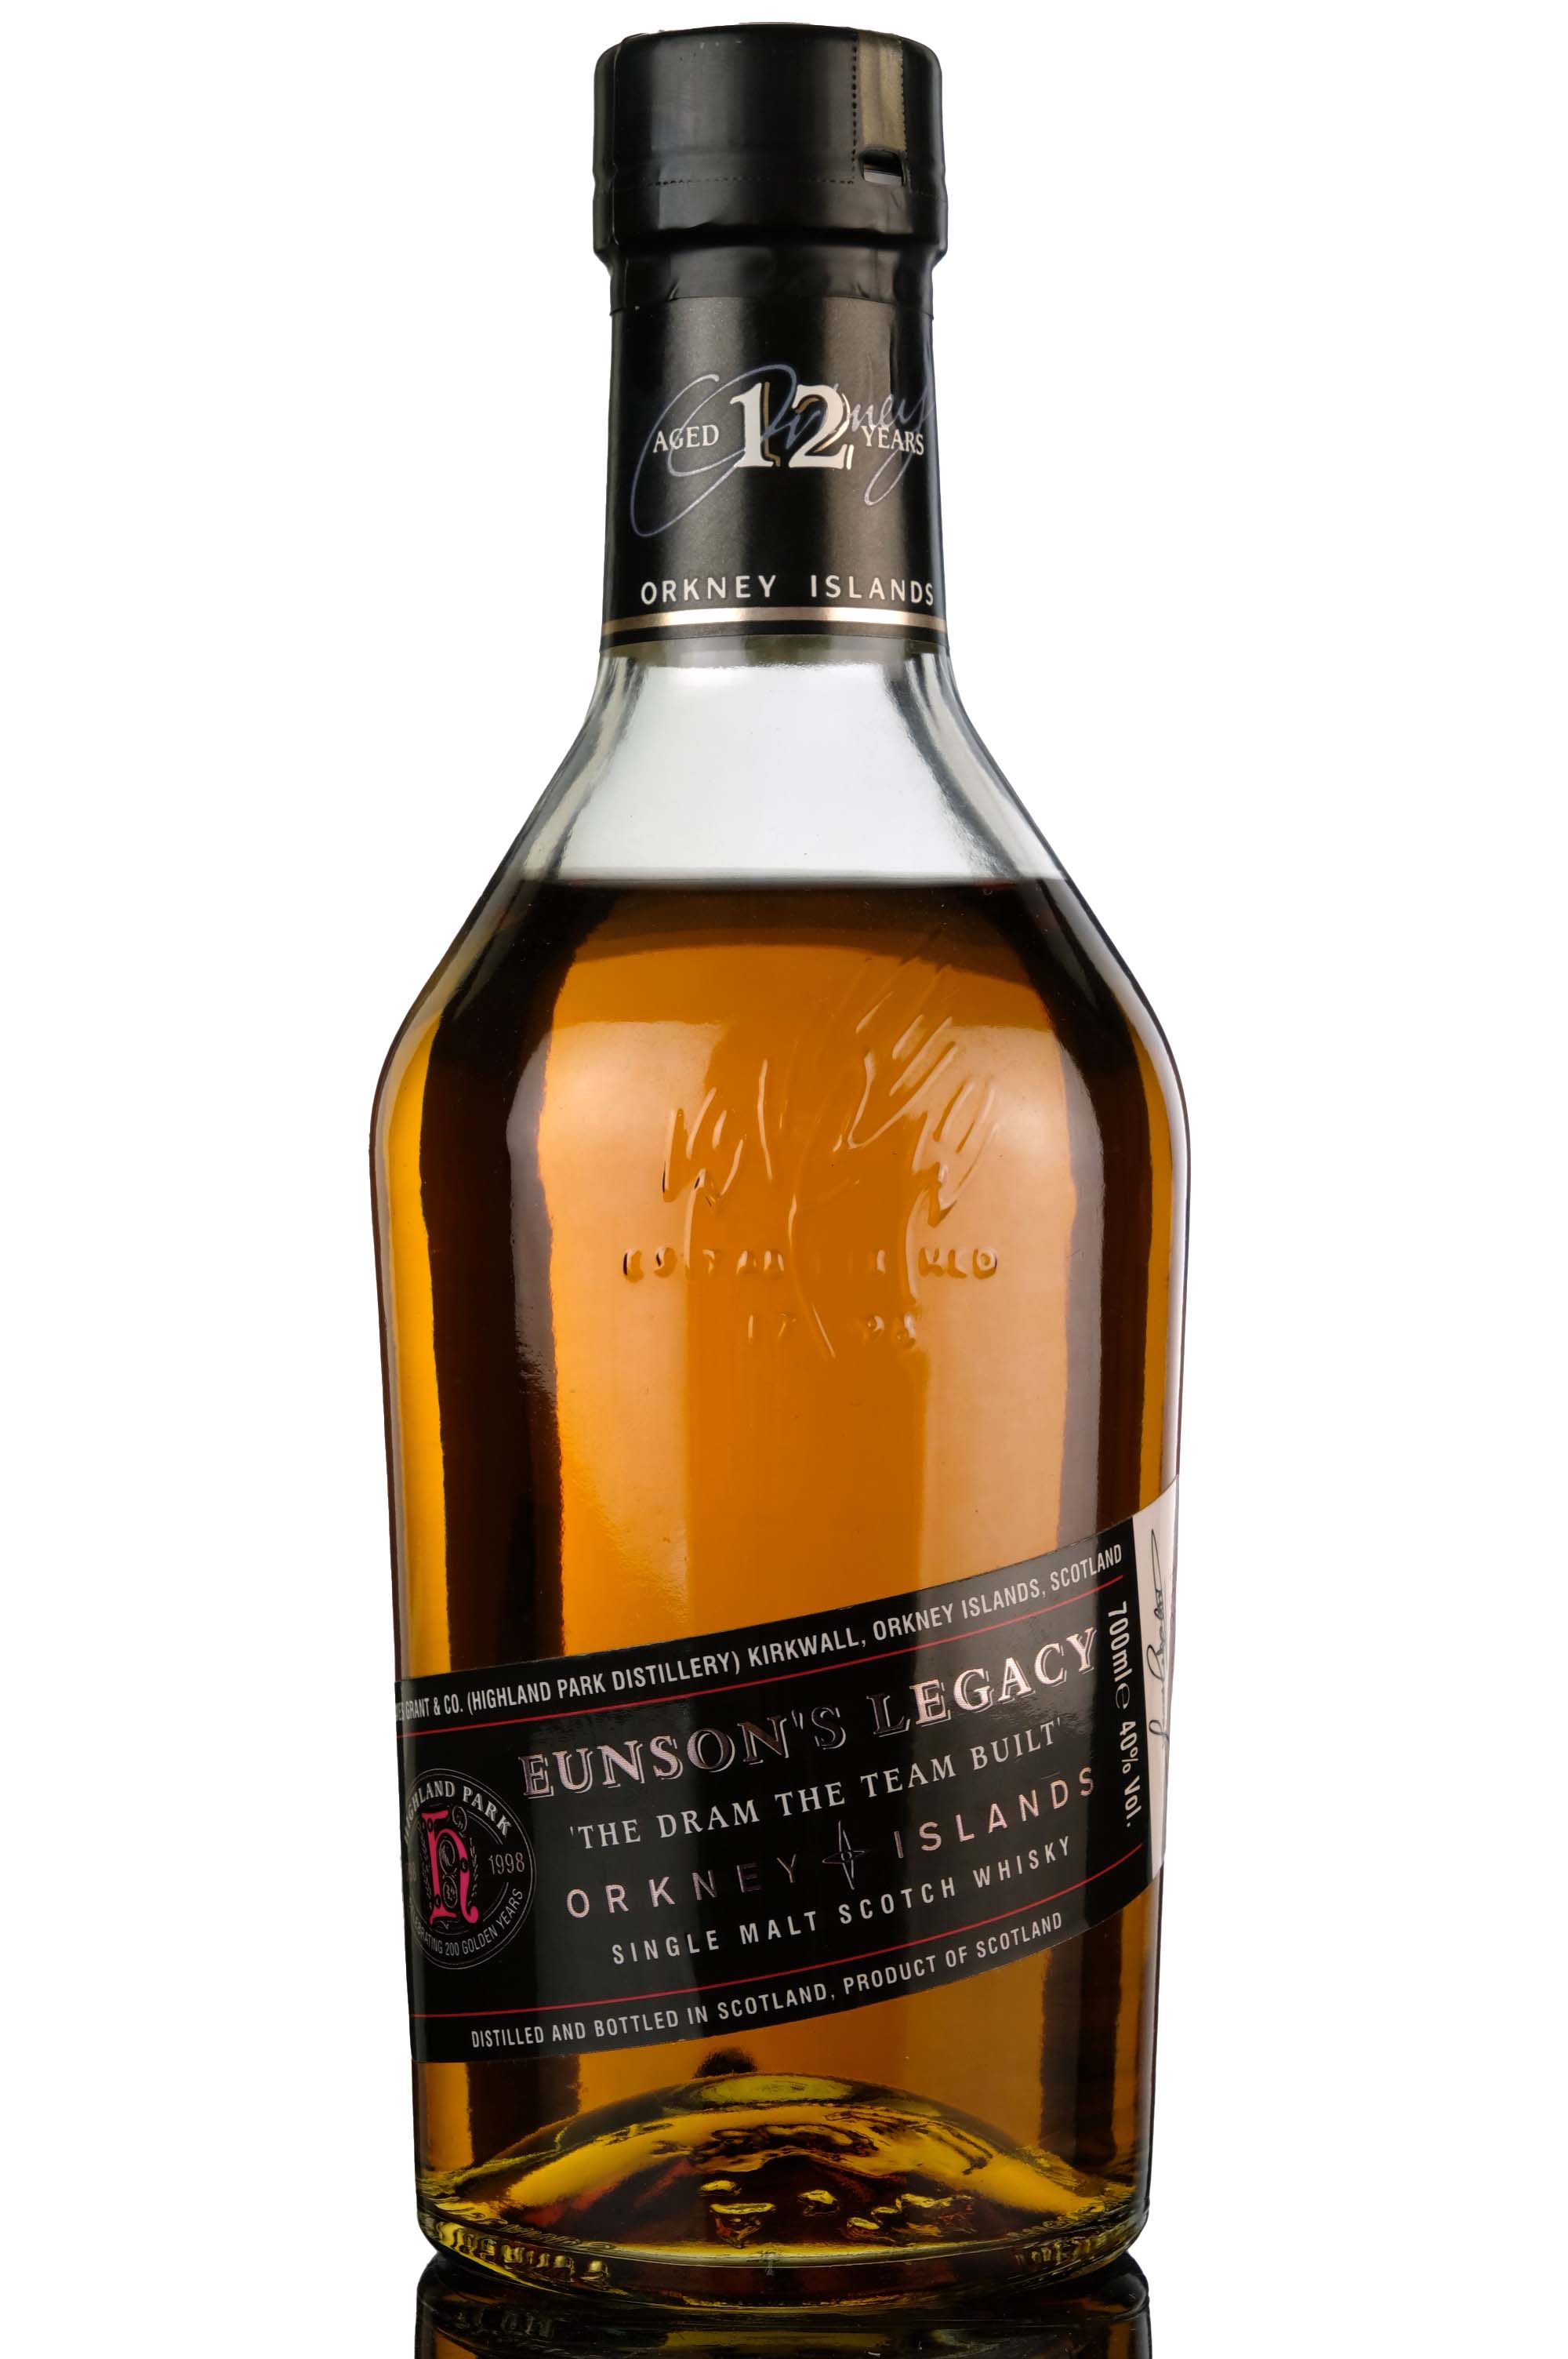 Highland Park 12 Year Old - Eunsons Legacy - 1998 Release